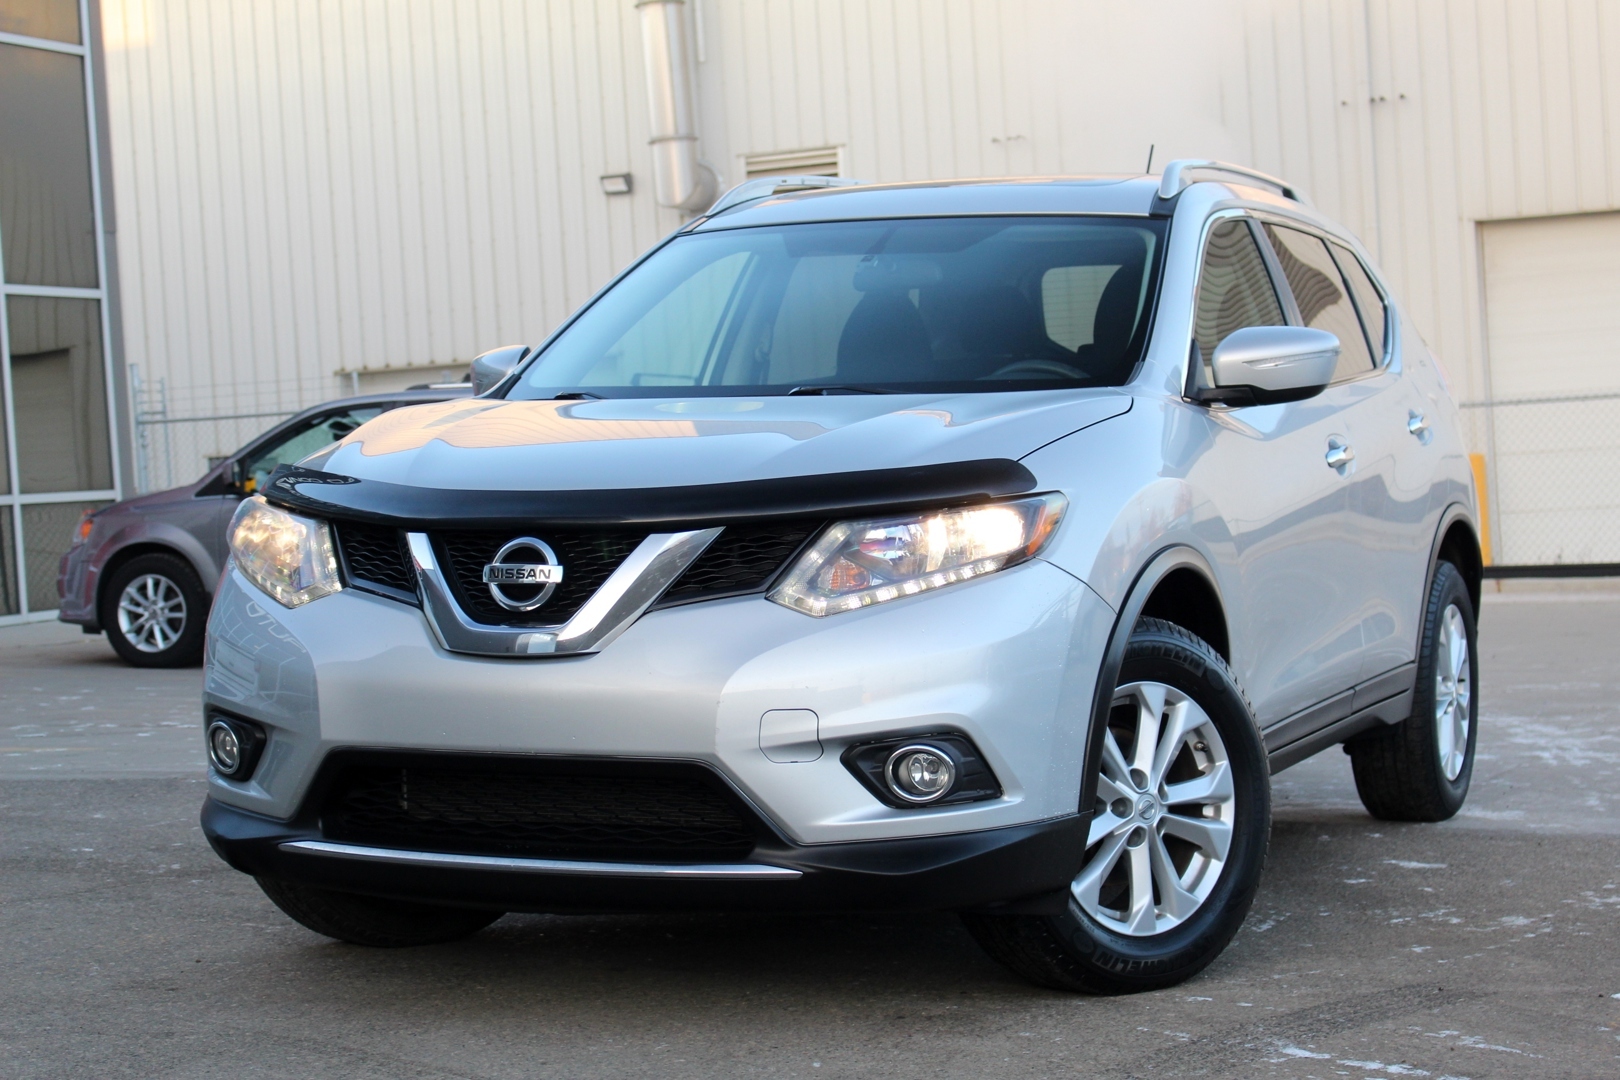 2015 Nissan Rogue SV - AWD - LOW KMS - PANORAMIC MOONROOF - HEATED S